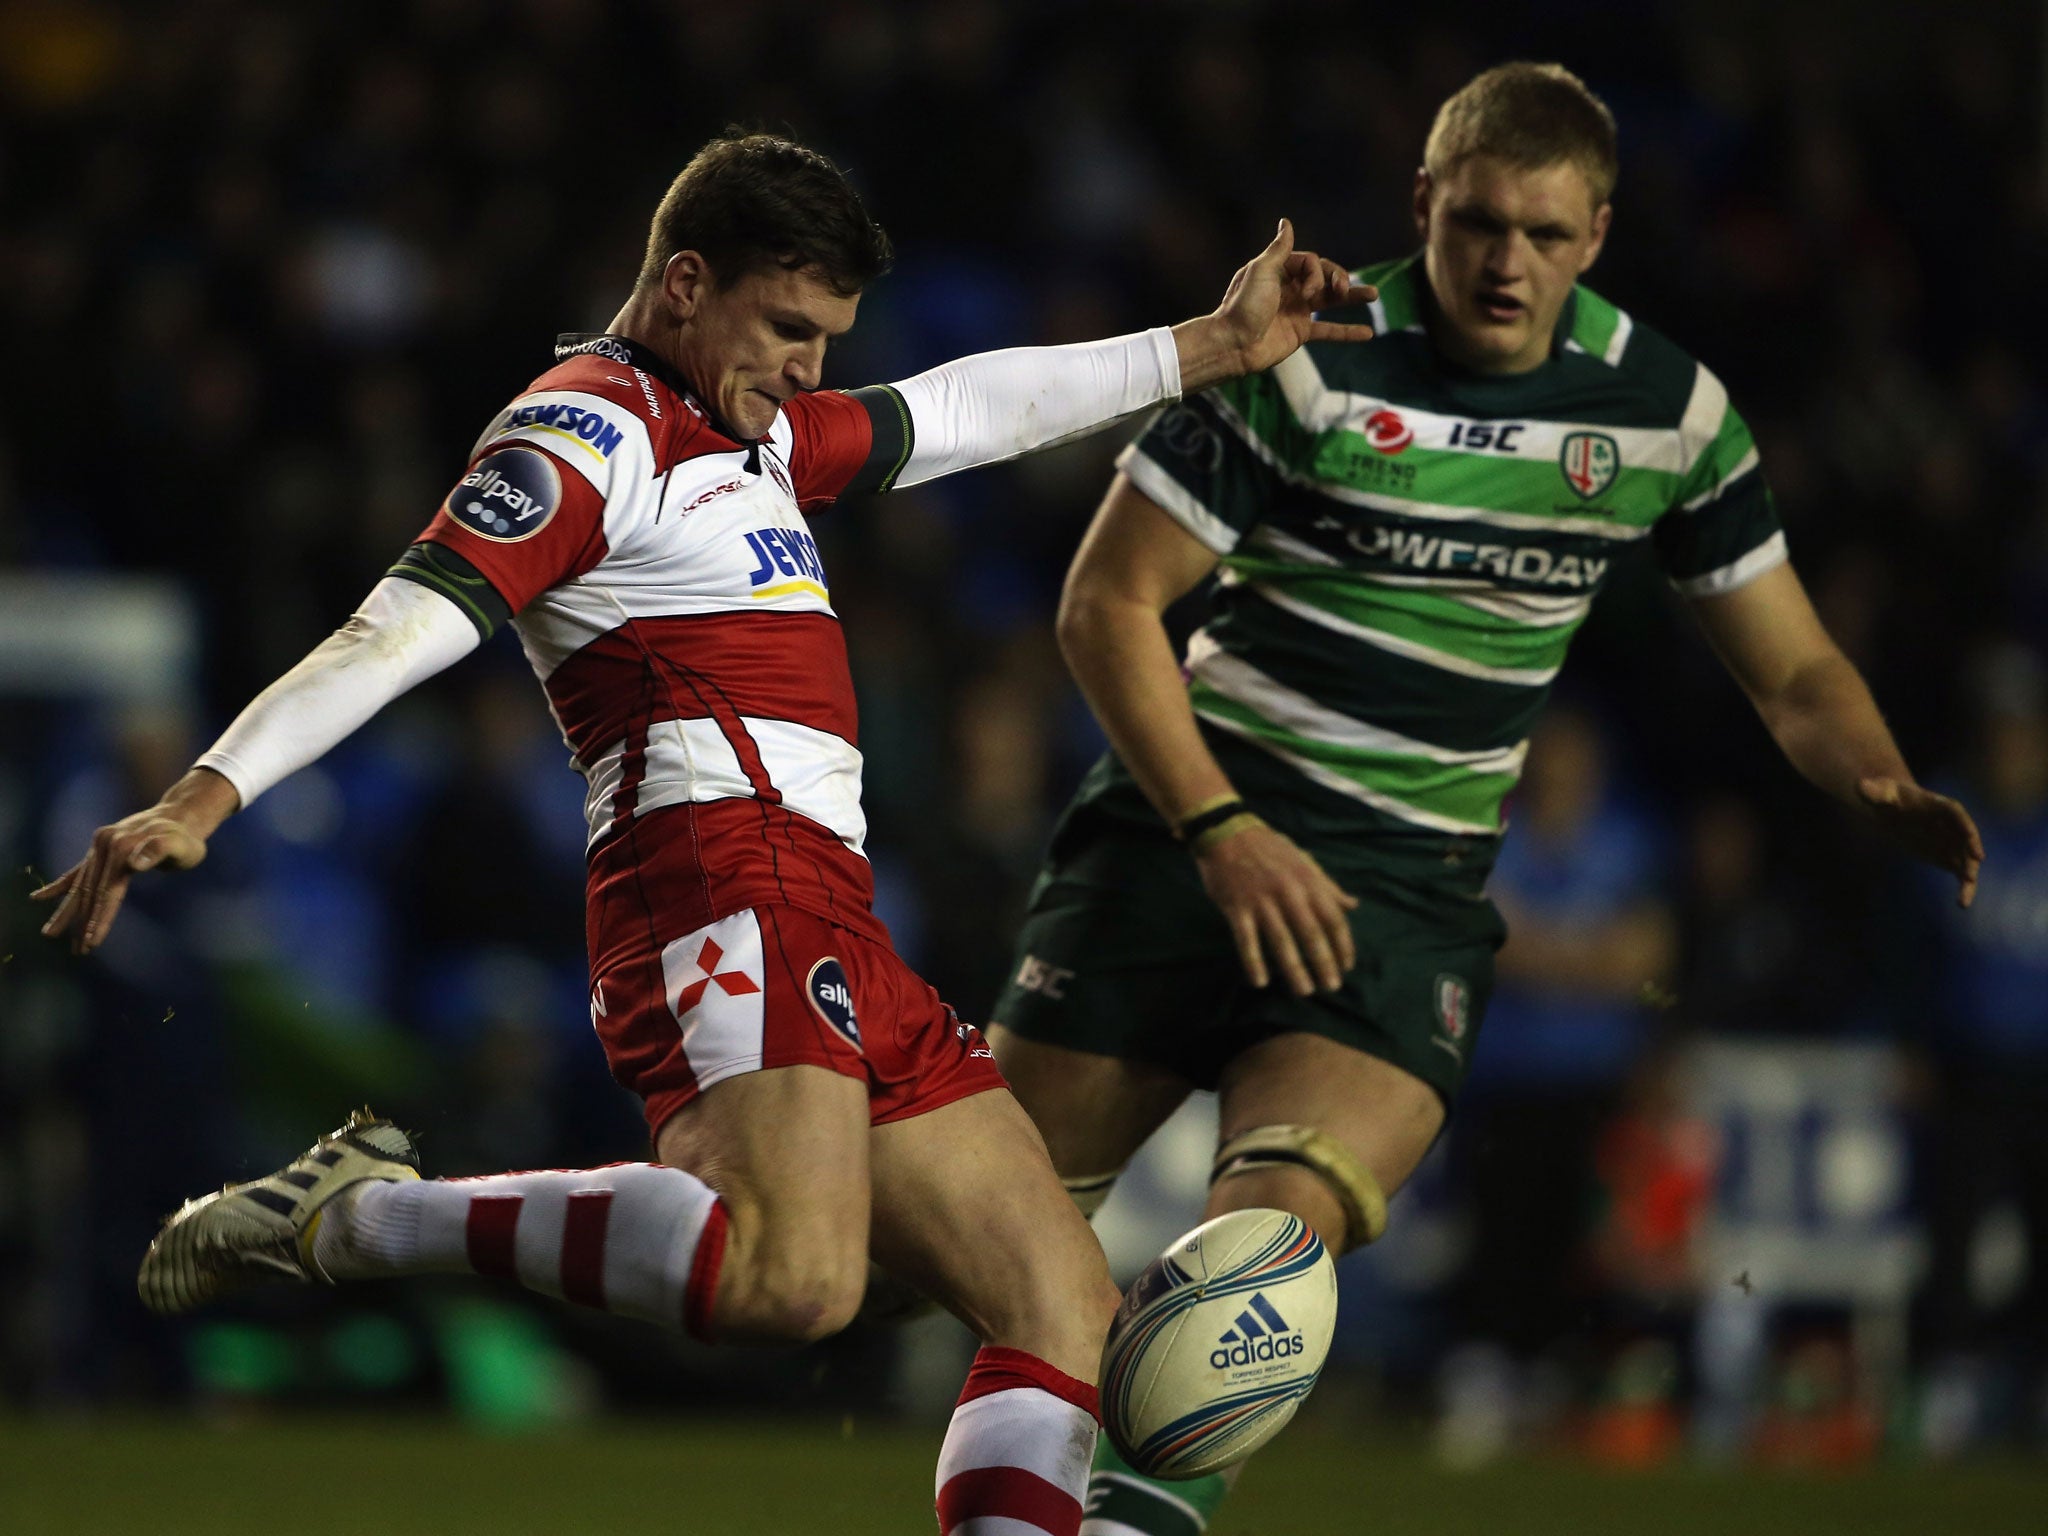 Putting the boot in: Gloucester’s Freddie Burns, who scored 24 of his side’s points, gets another kick away